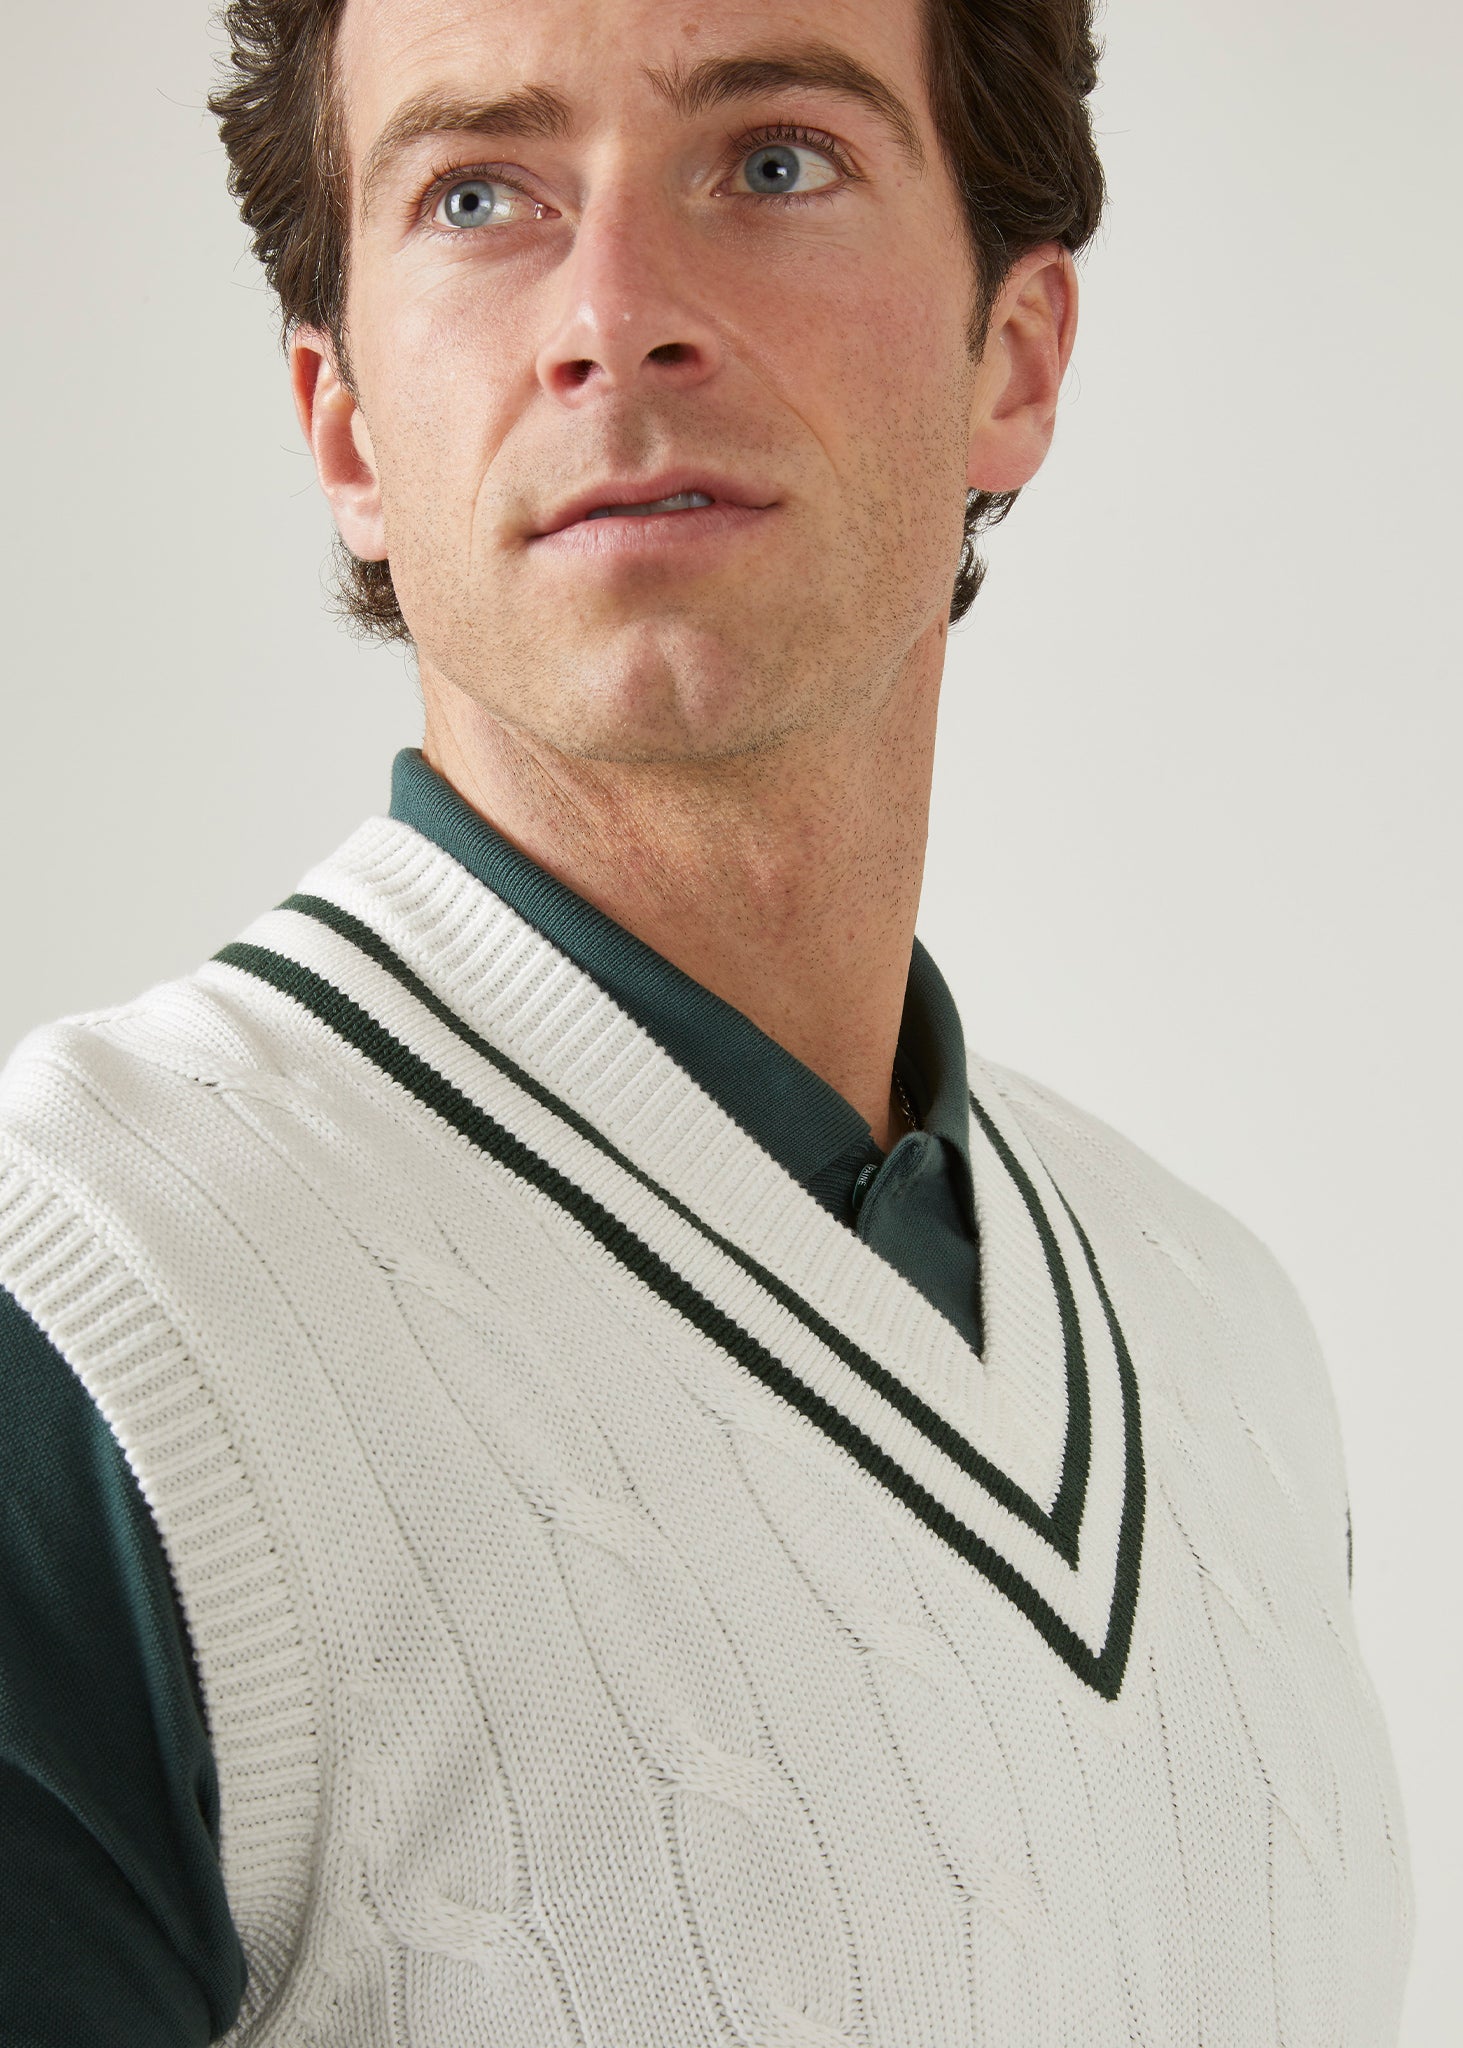 cable knit vee neck slipover in ecru with racing green trim.